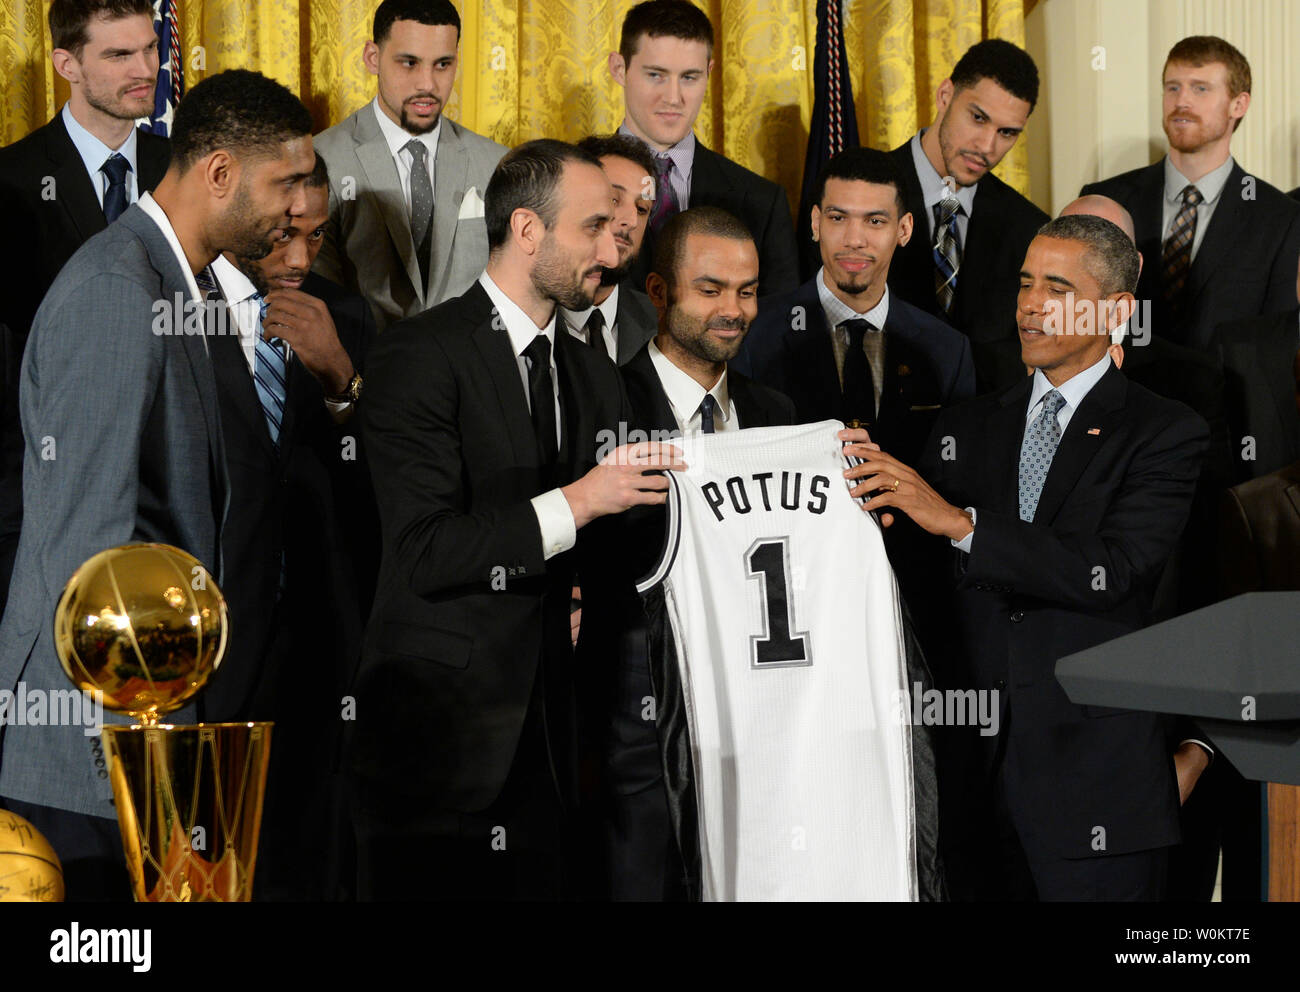 U.S. President Barack Obama receives a game jersey from San Antonio Spurs player Manu Ginobili (L) as Obama honors the 2014 NBA Champion Spurs in the East Room of the White House in Washington, DC. on January 12, 2015.  The Spurs won their fifth championship.   Photo by Pat Benic/UPI Stock Photo